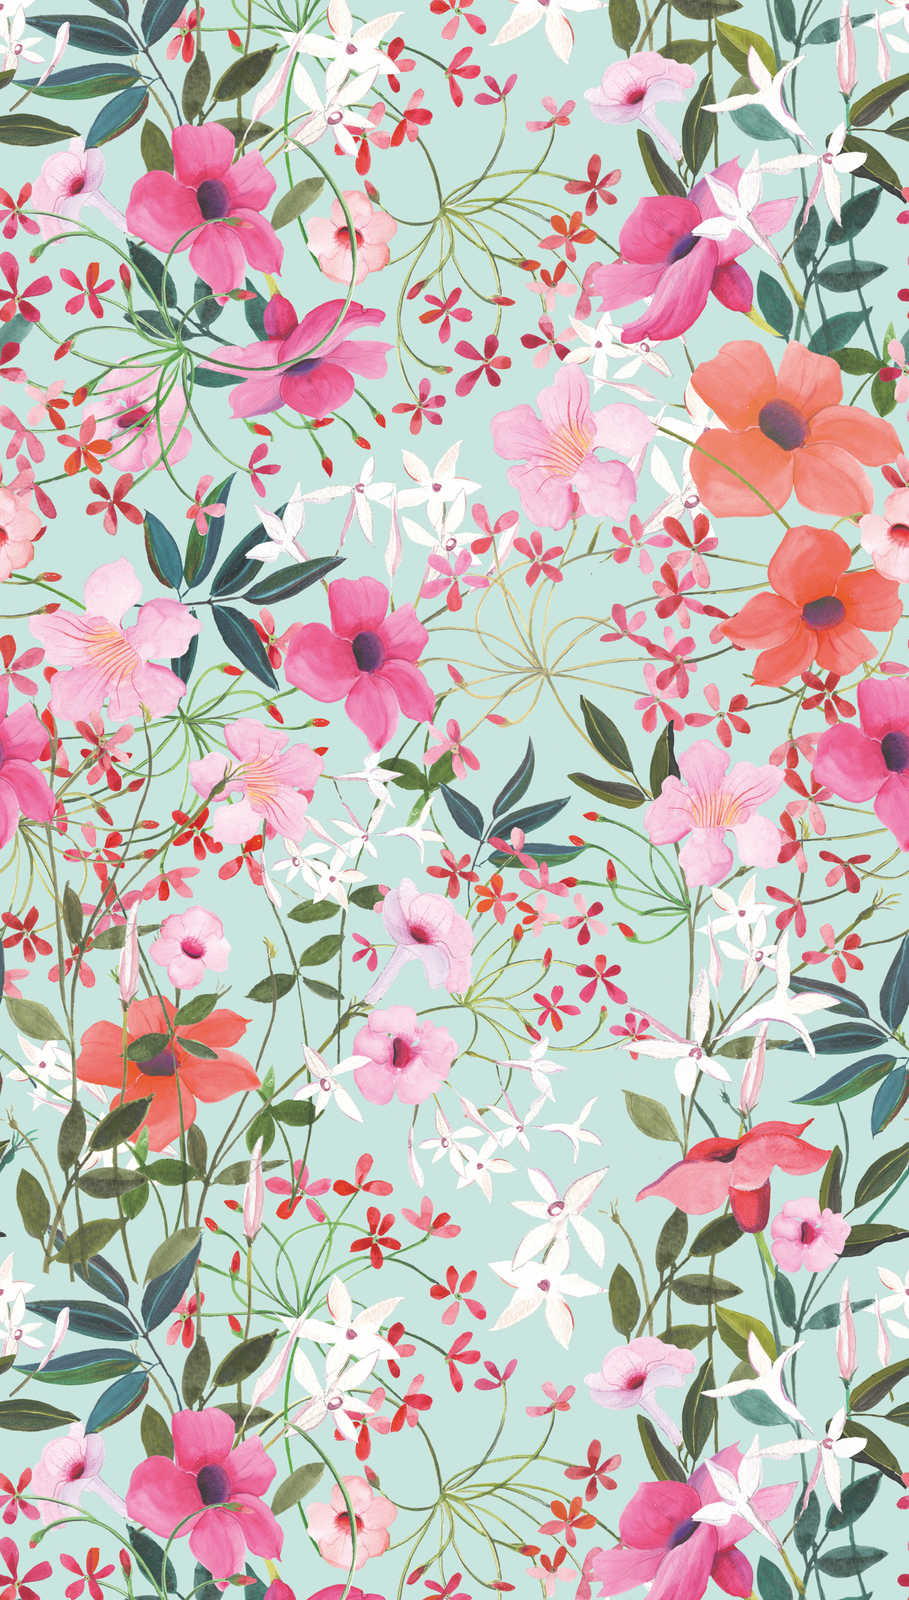             Non-woven wallpaper with floral motif and leaves - multicoloured, turquoise, green
        